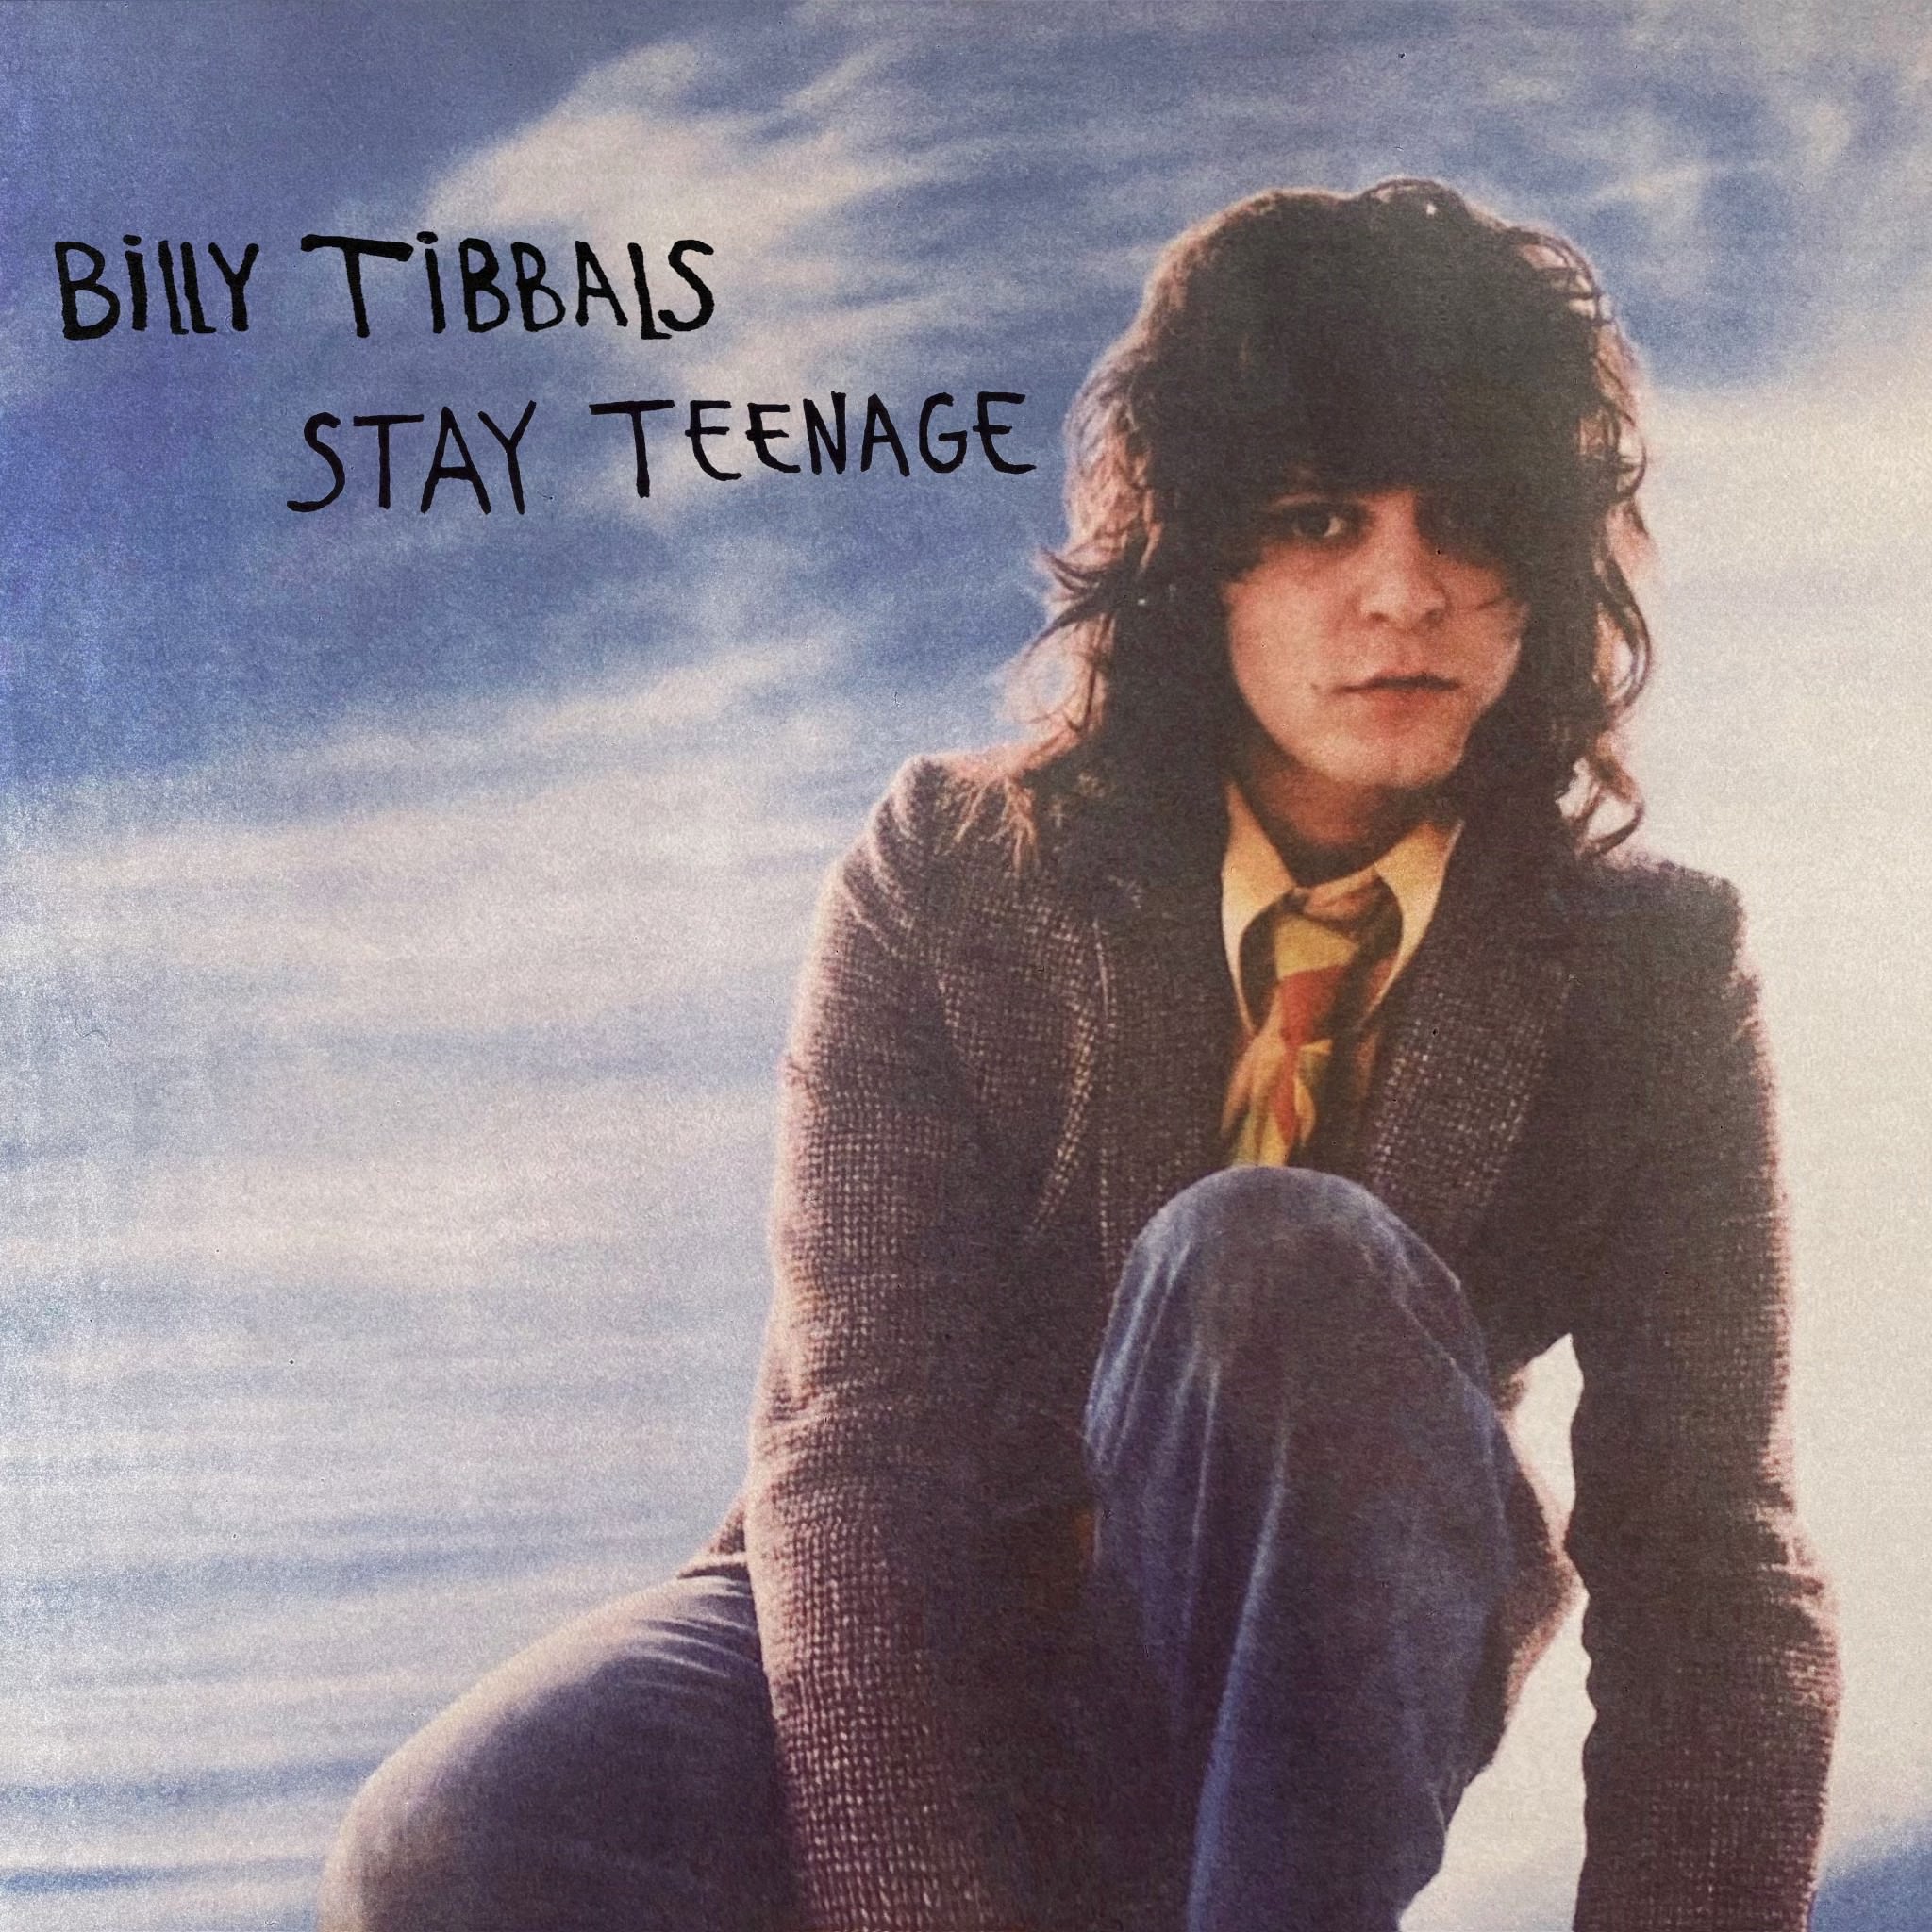 Billy Tibbals Announces Debut EP Stay Teenage